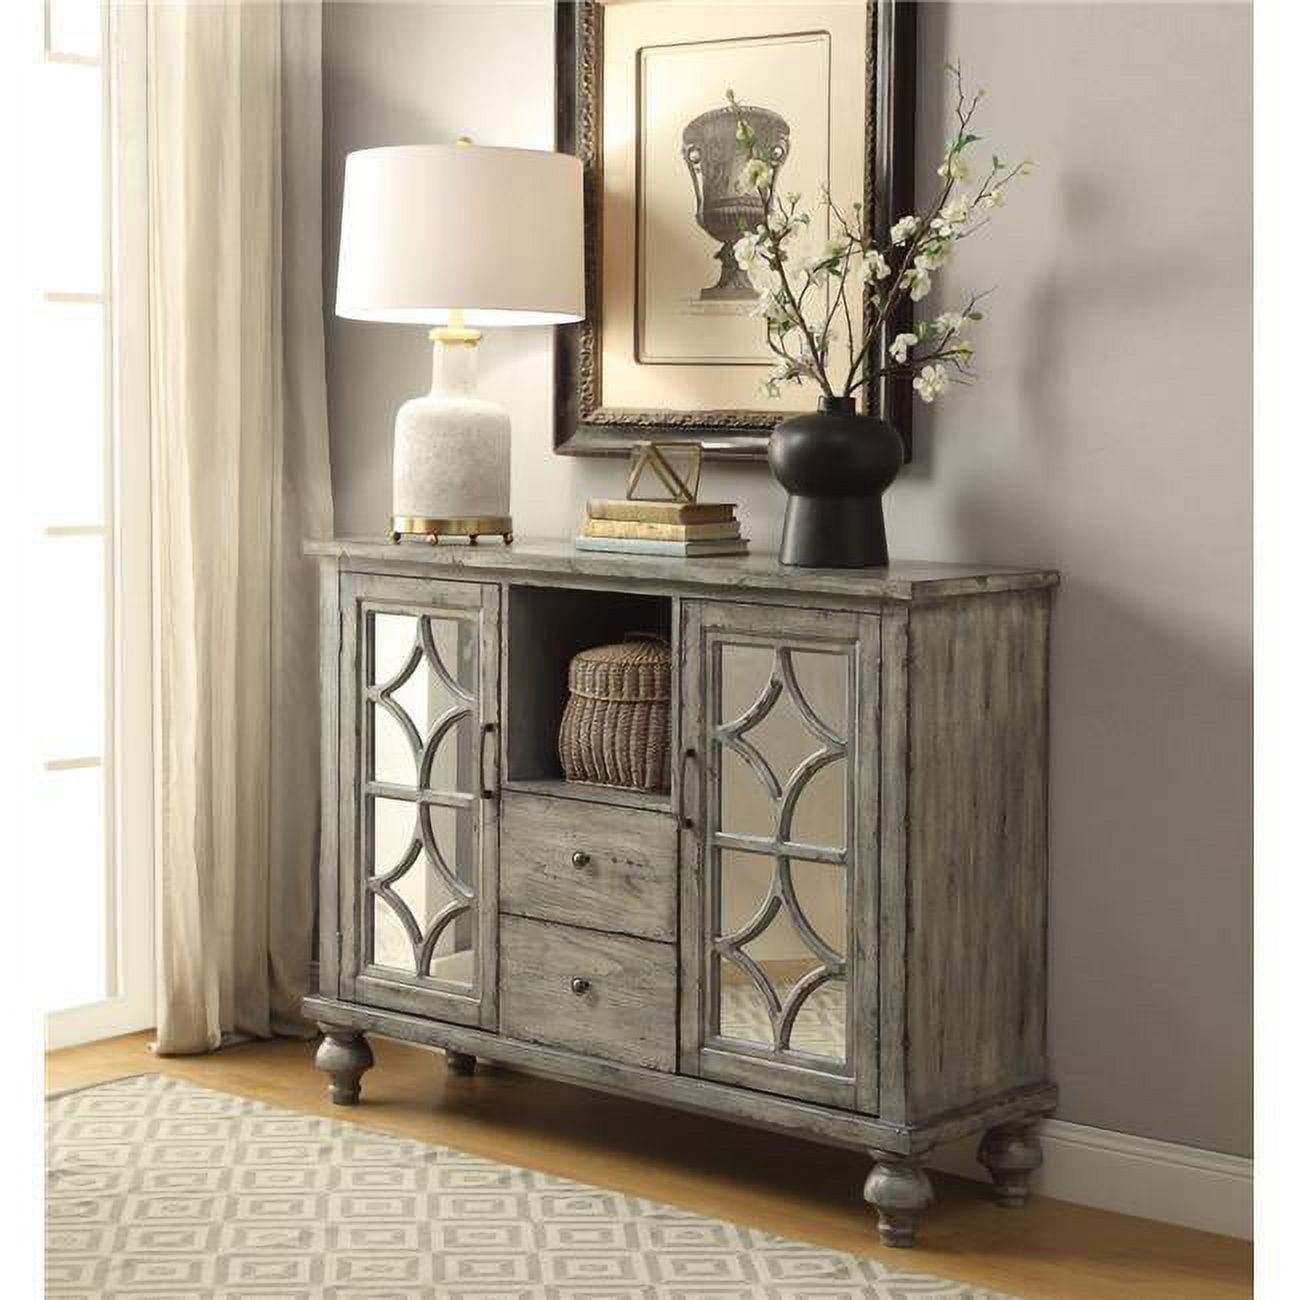 Picture of ACME 90282 Velika Console Table, Weathered Gray - 37 x 45 x 15 in.